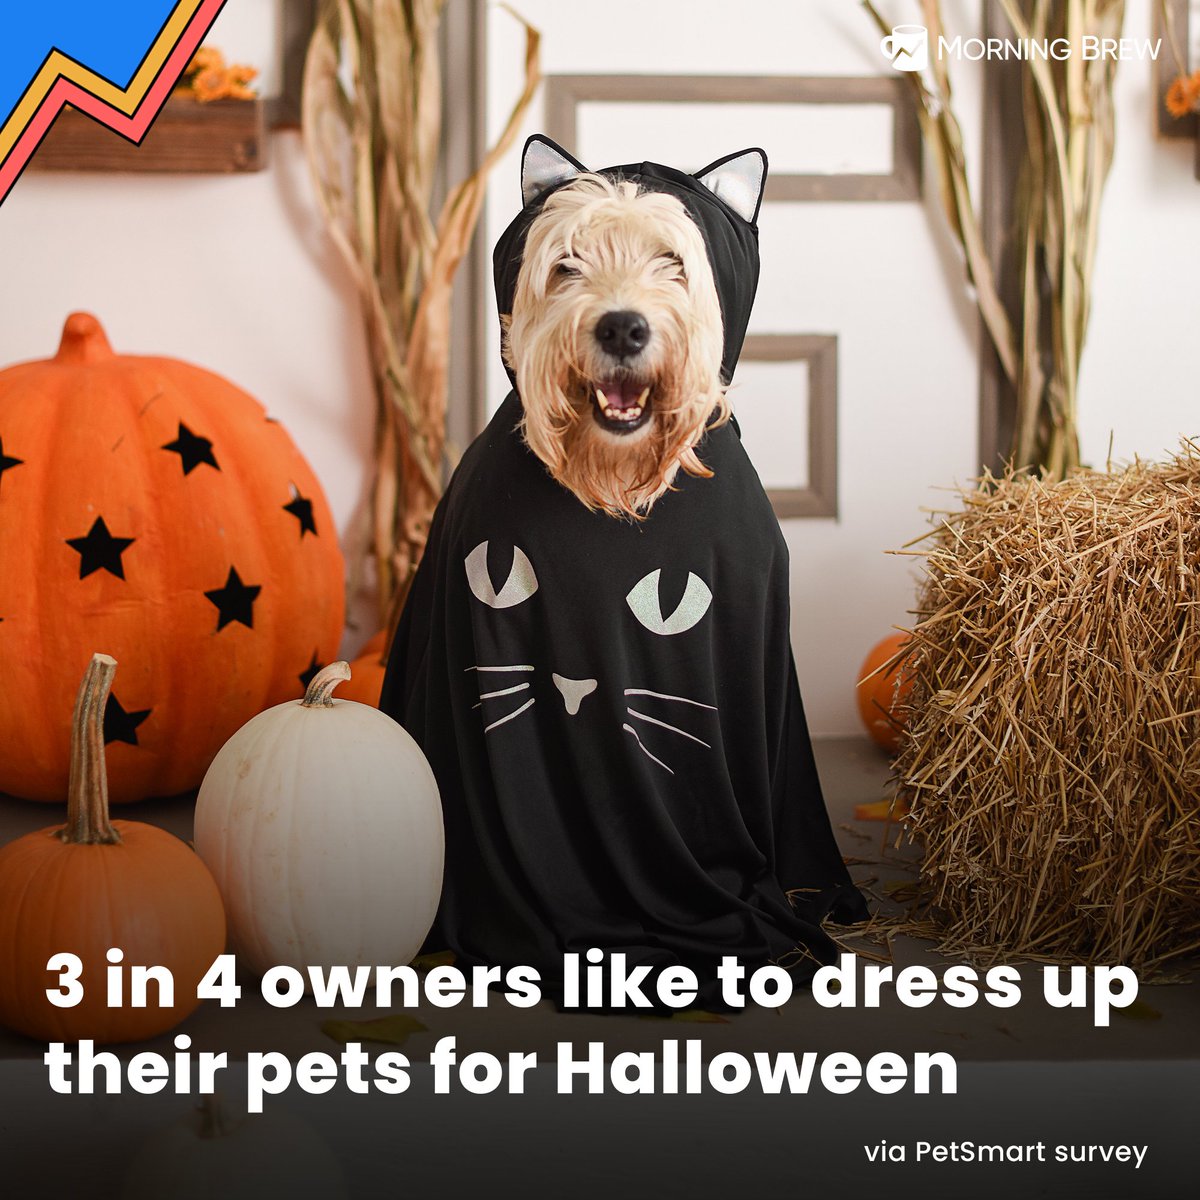 The most popular costume among pets is the classic pumpkin, according to Petsmart CEO J.K. Symancyk.